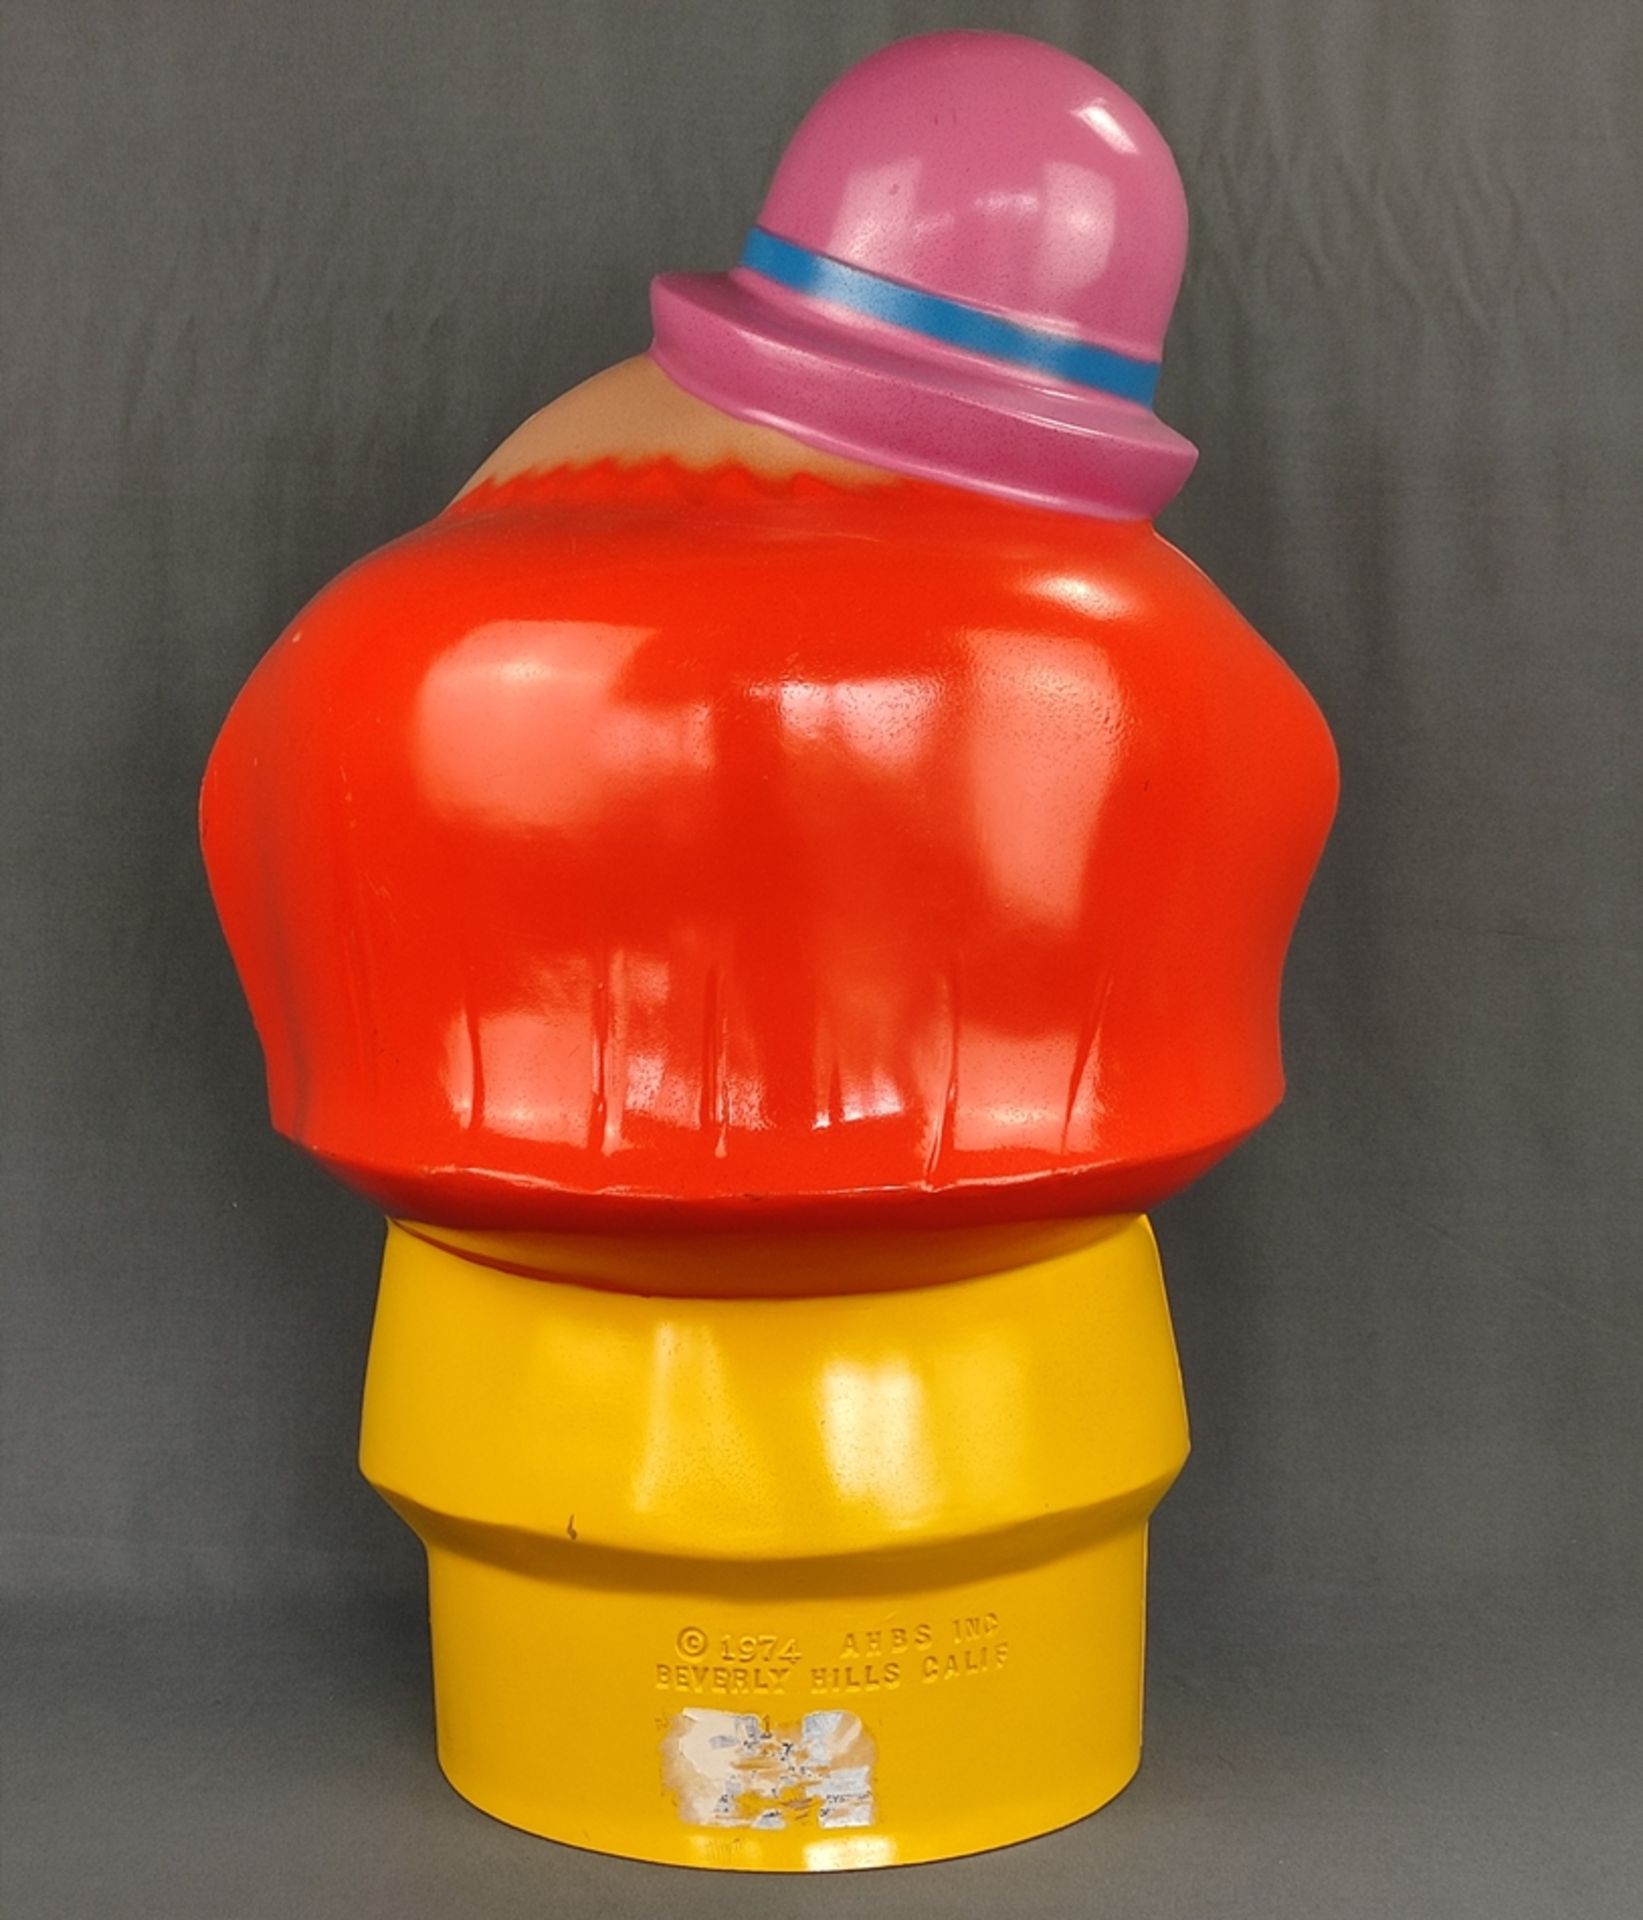 Clown head as balloon inflator, balloon inflator, 1974, Beverly Hills Calif, polychrome, plastic, h - Image 3 of 7